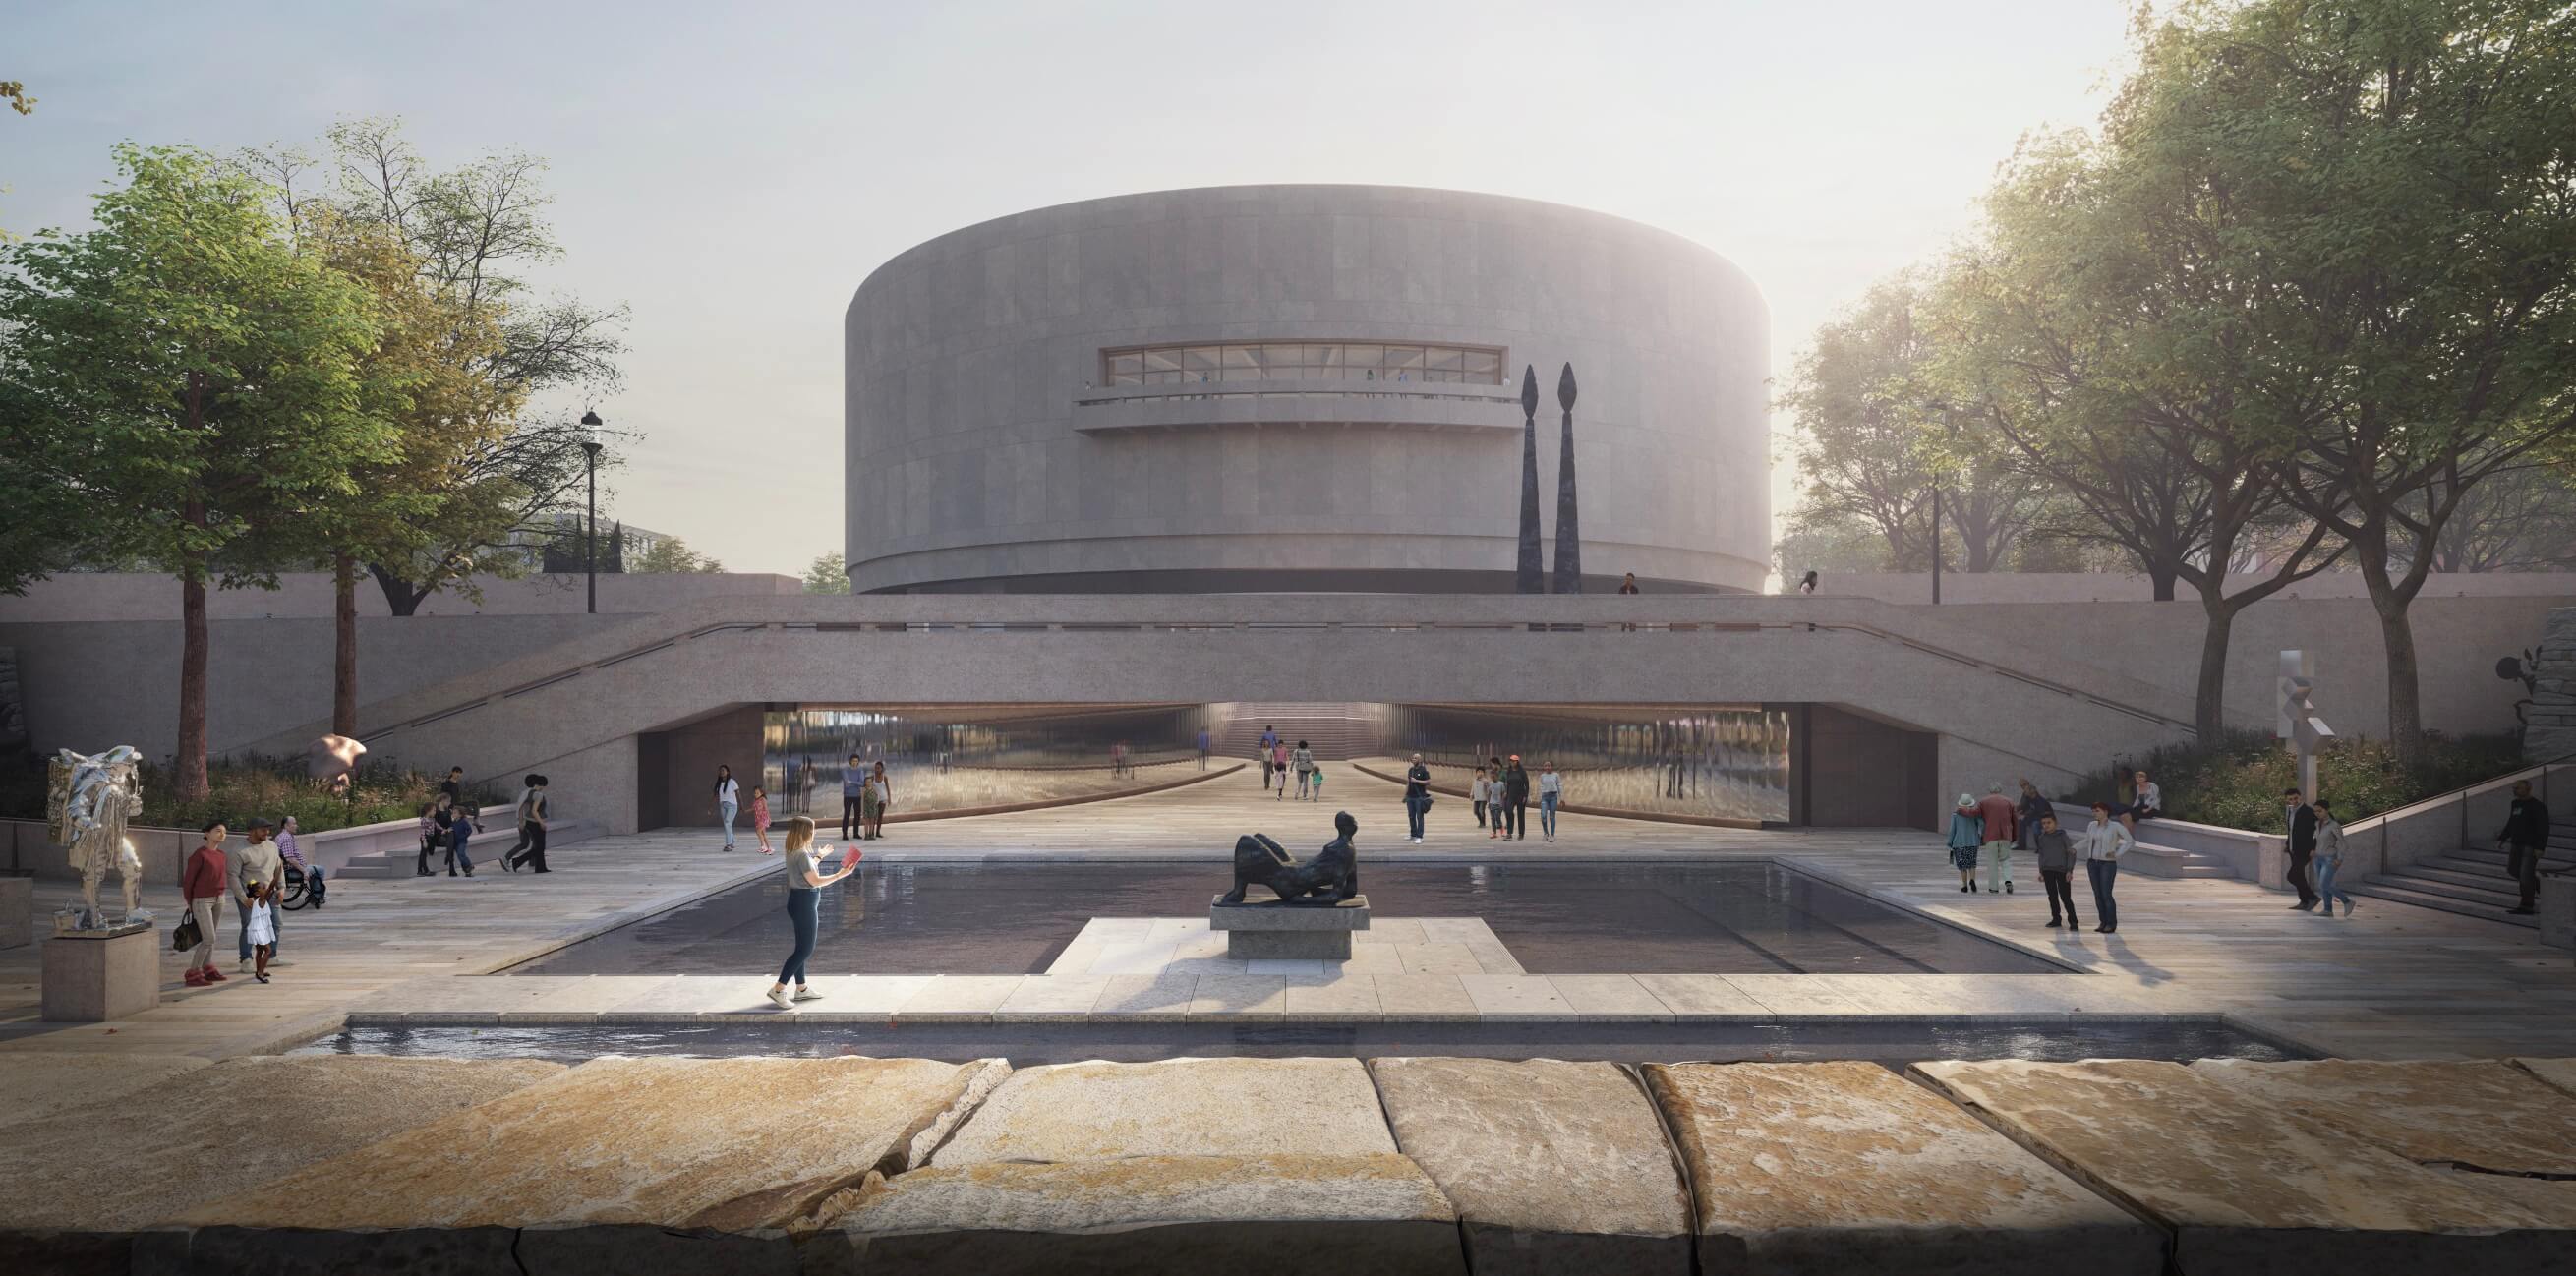 rendering of the hirshhorn museum with its revamped sculpture garden in the foreground